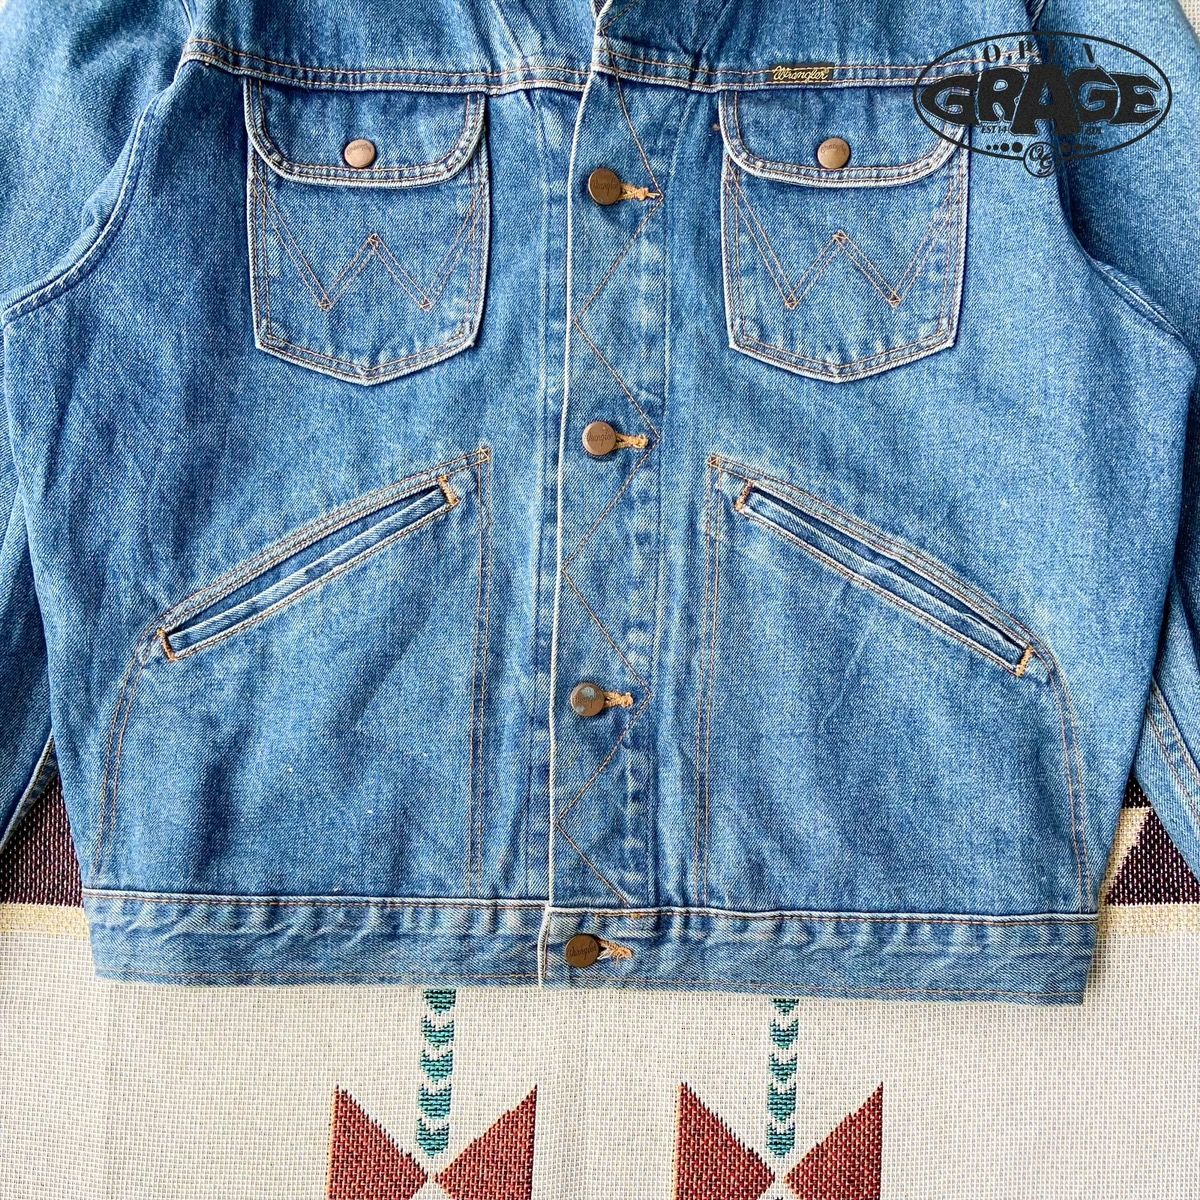 Archival Clothing - Collectible Classic VTG Wrangler Jean Jacket Worn by Icons - 7